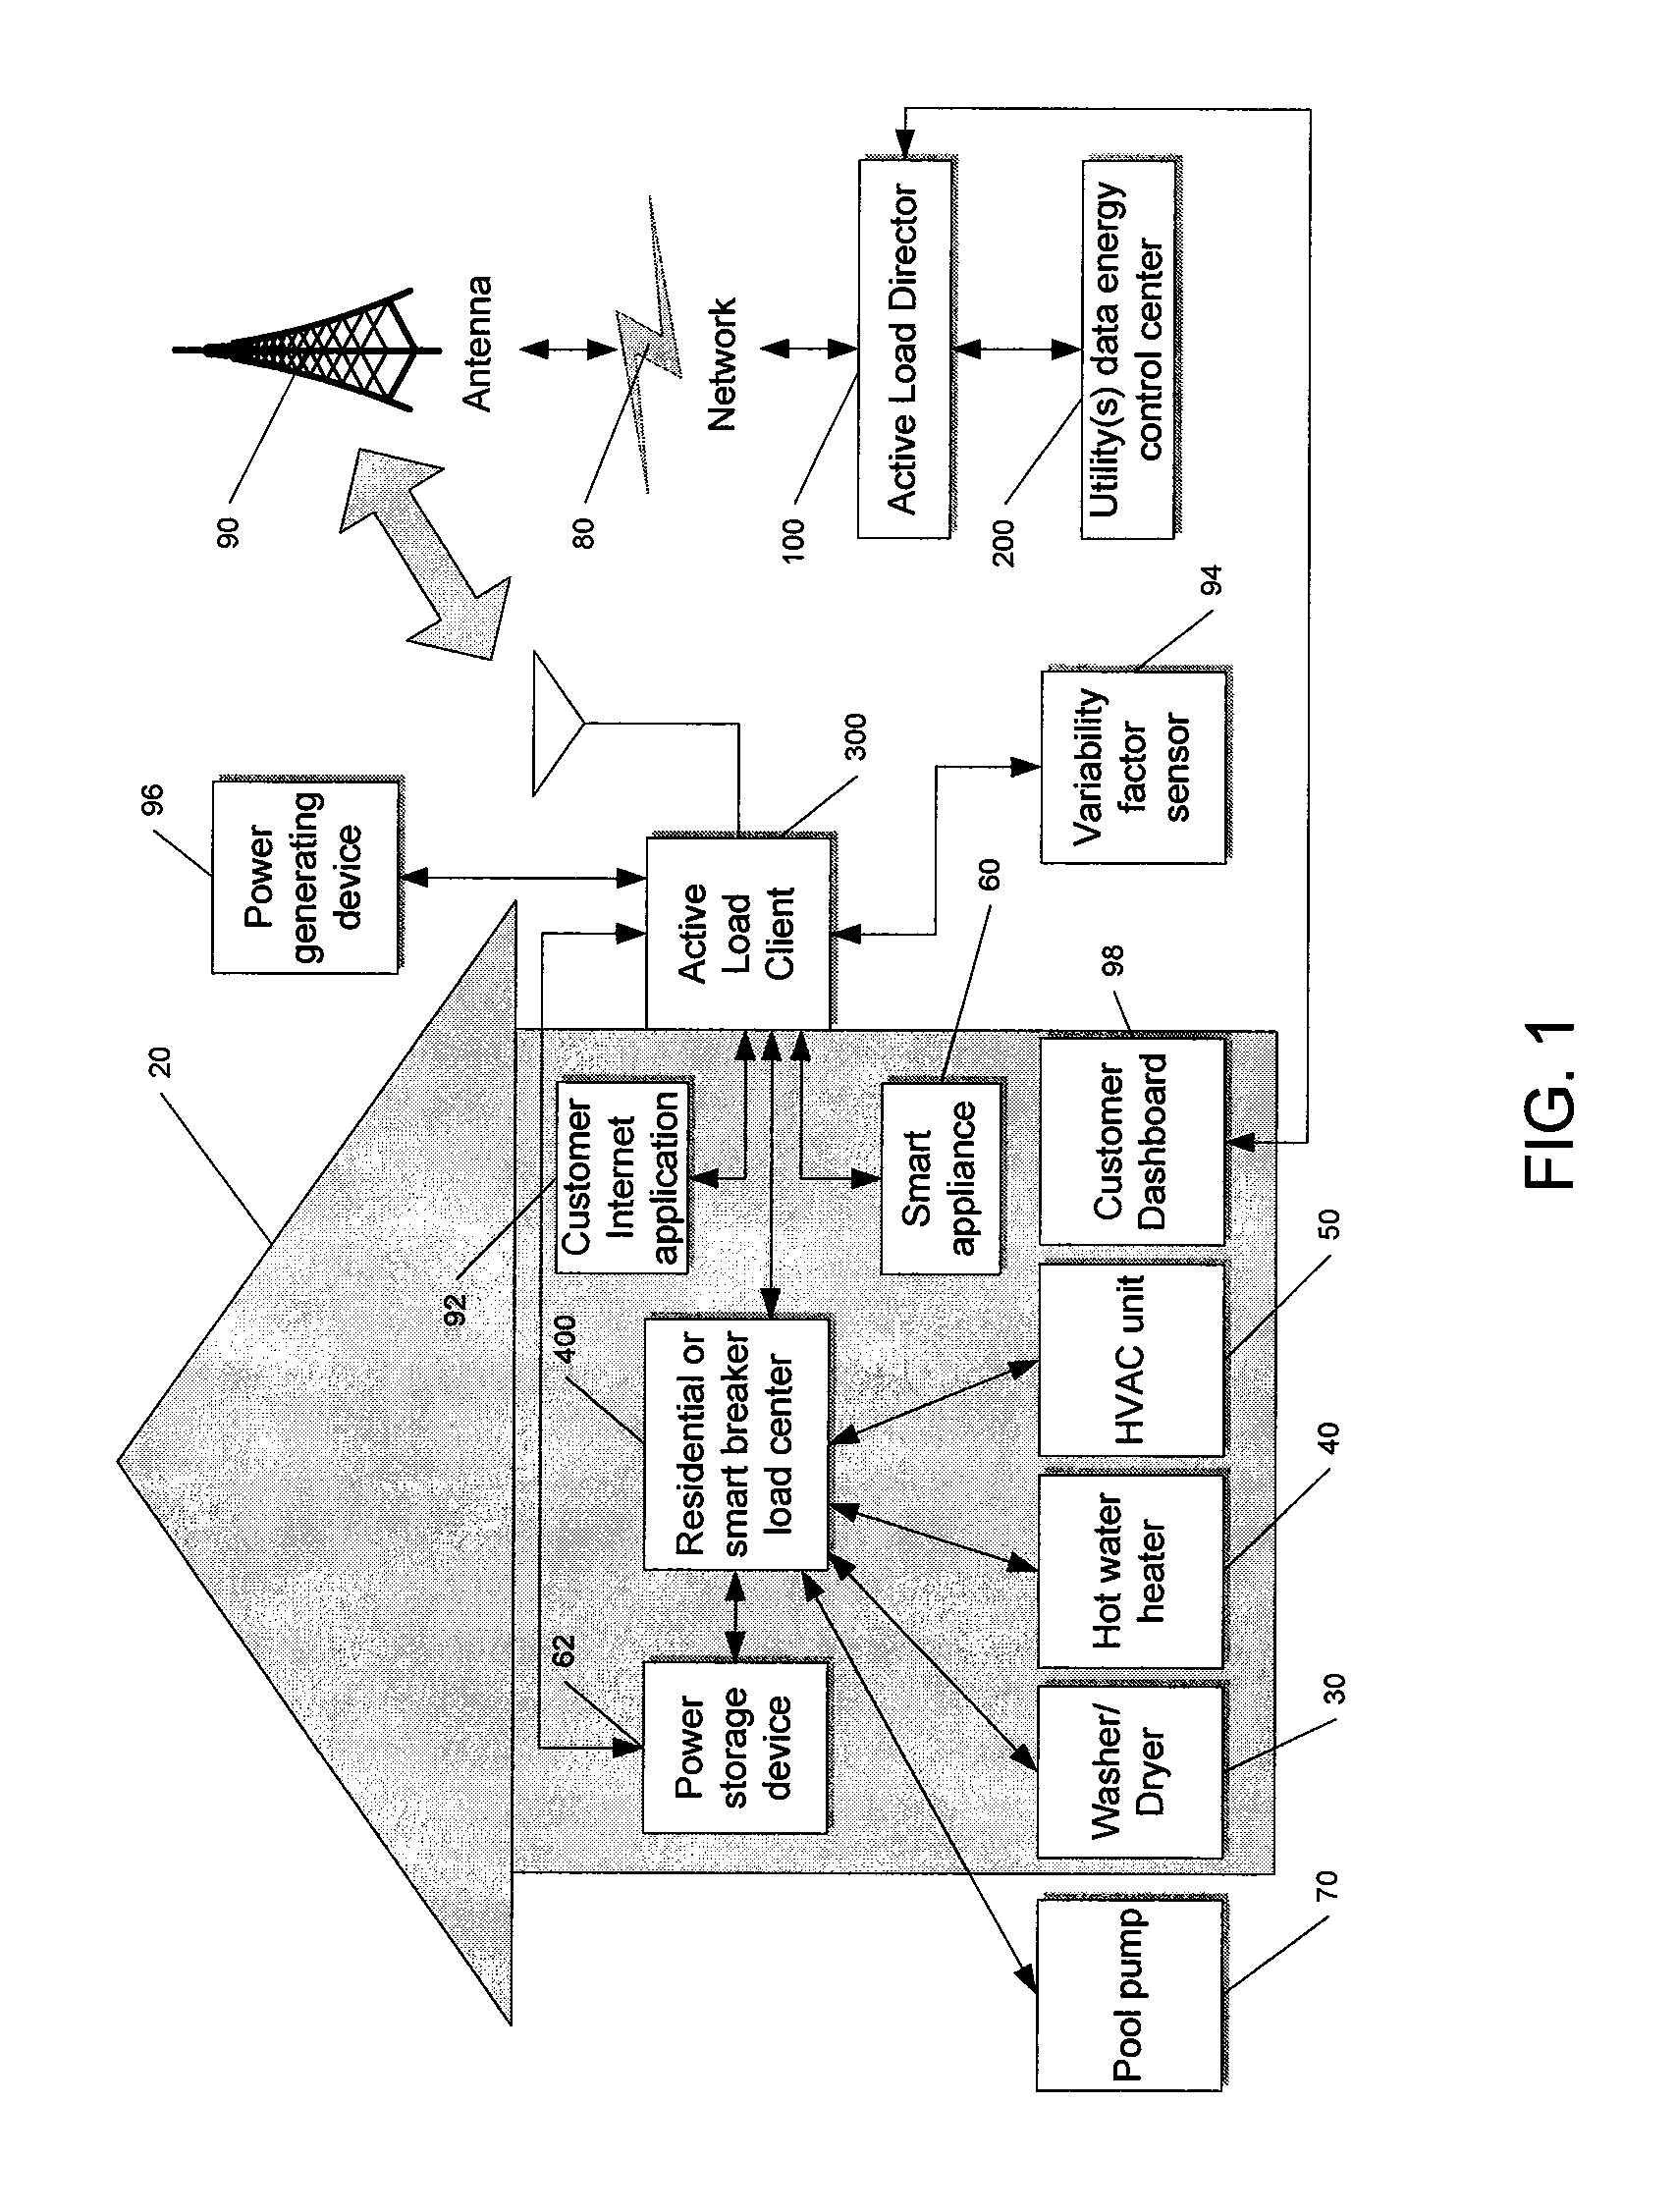 System and method for determining and utilizing customer energy profiles for load control for individual structures, devices, and aggregation of same